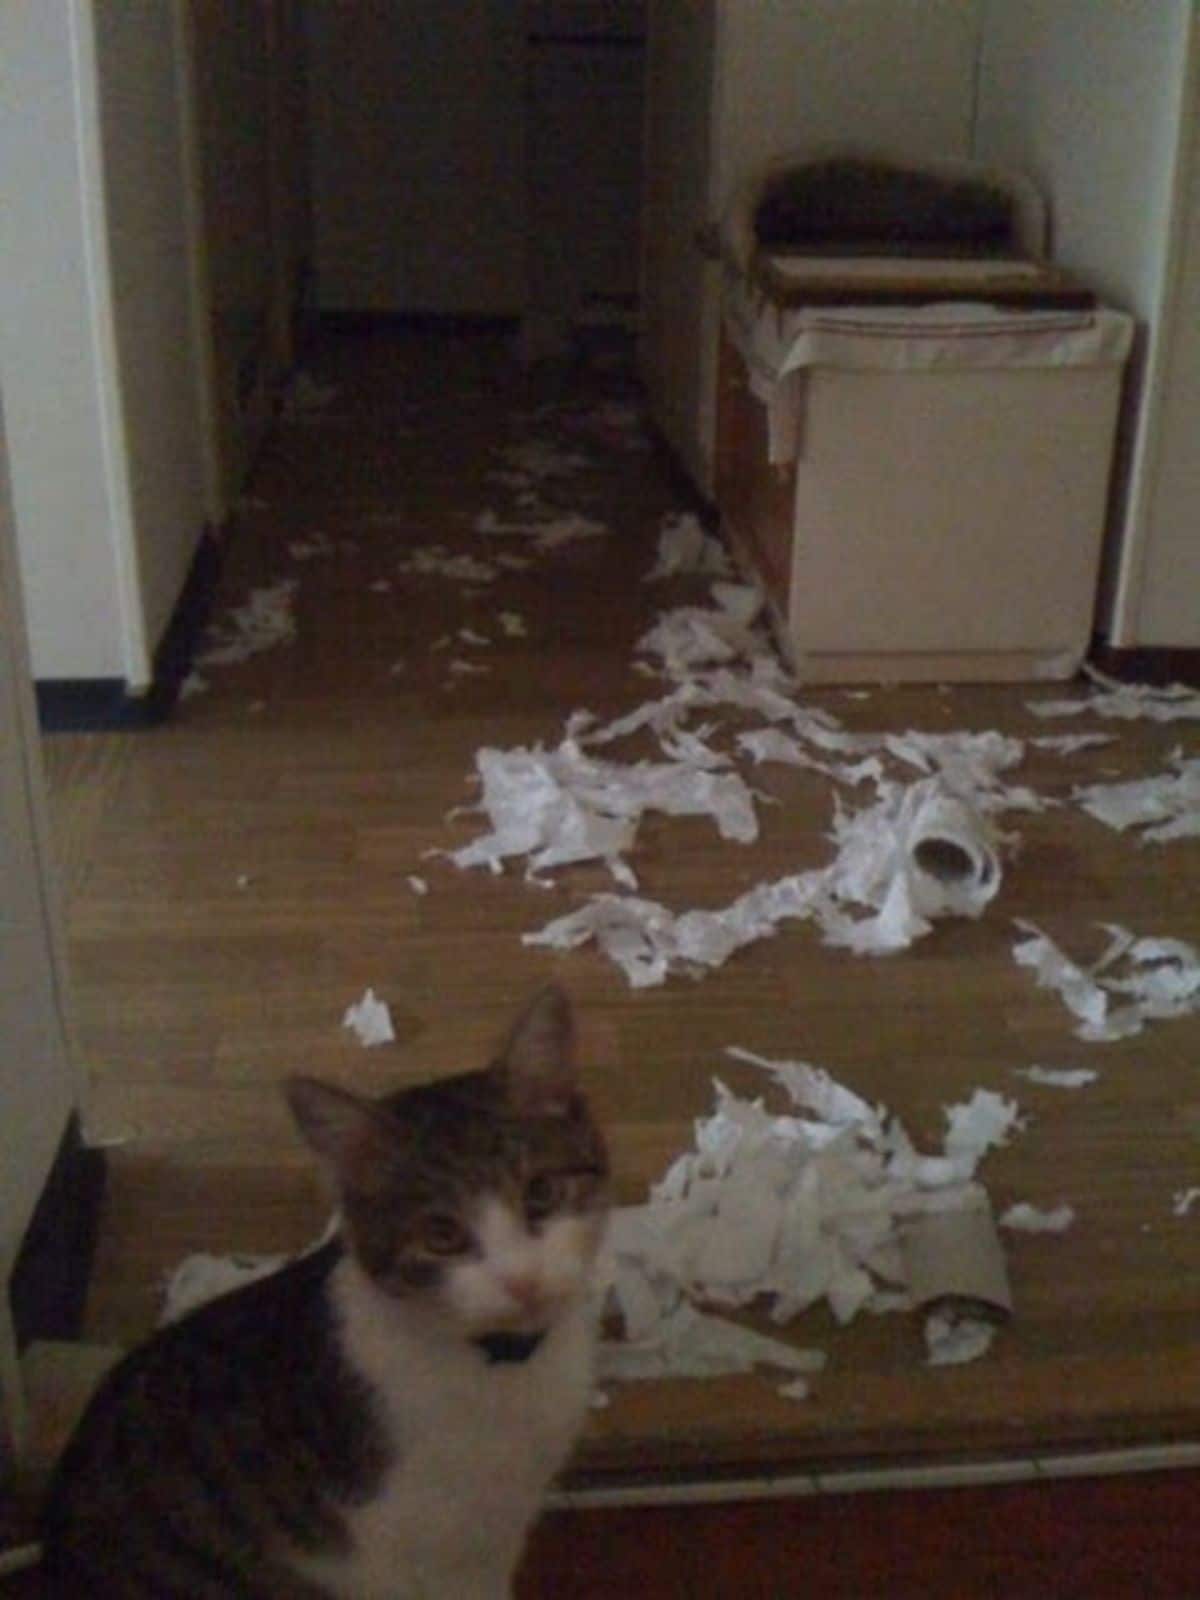 grey and white tabby cat sitting with ripped up toilet paper behind it